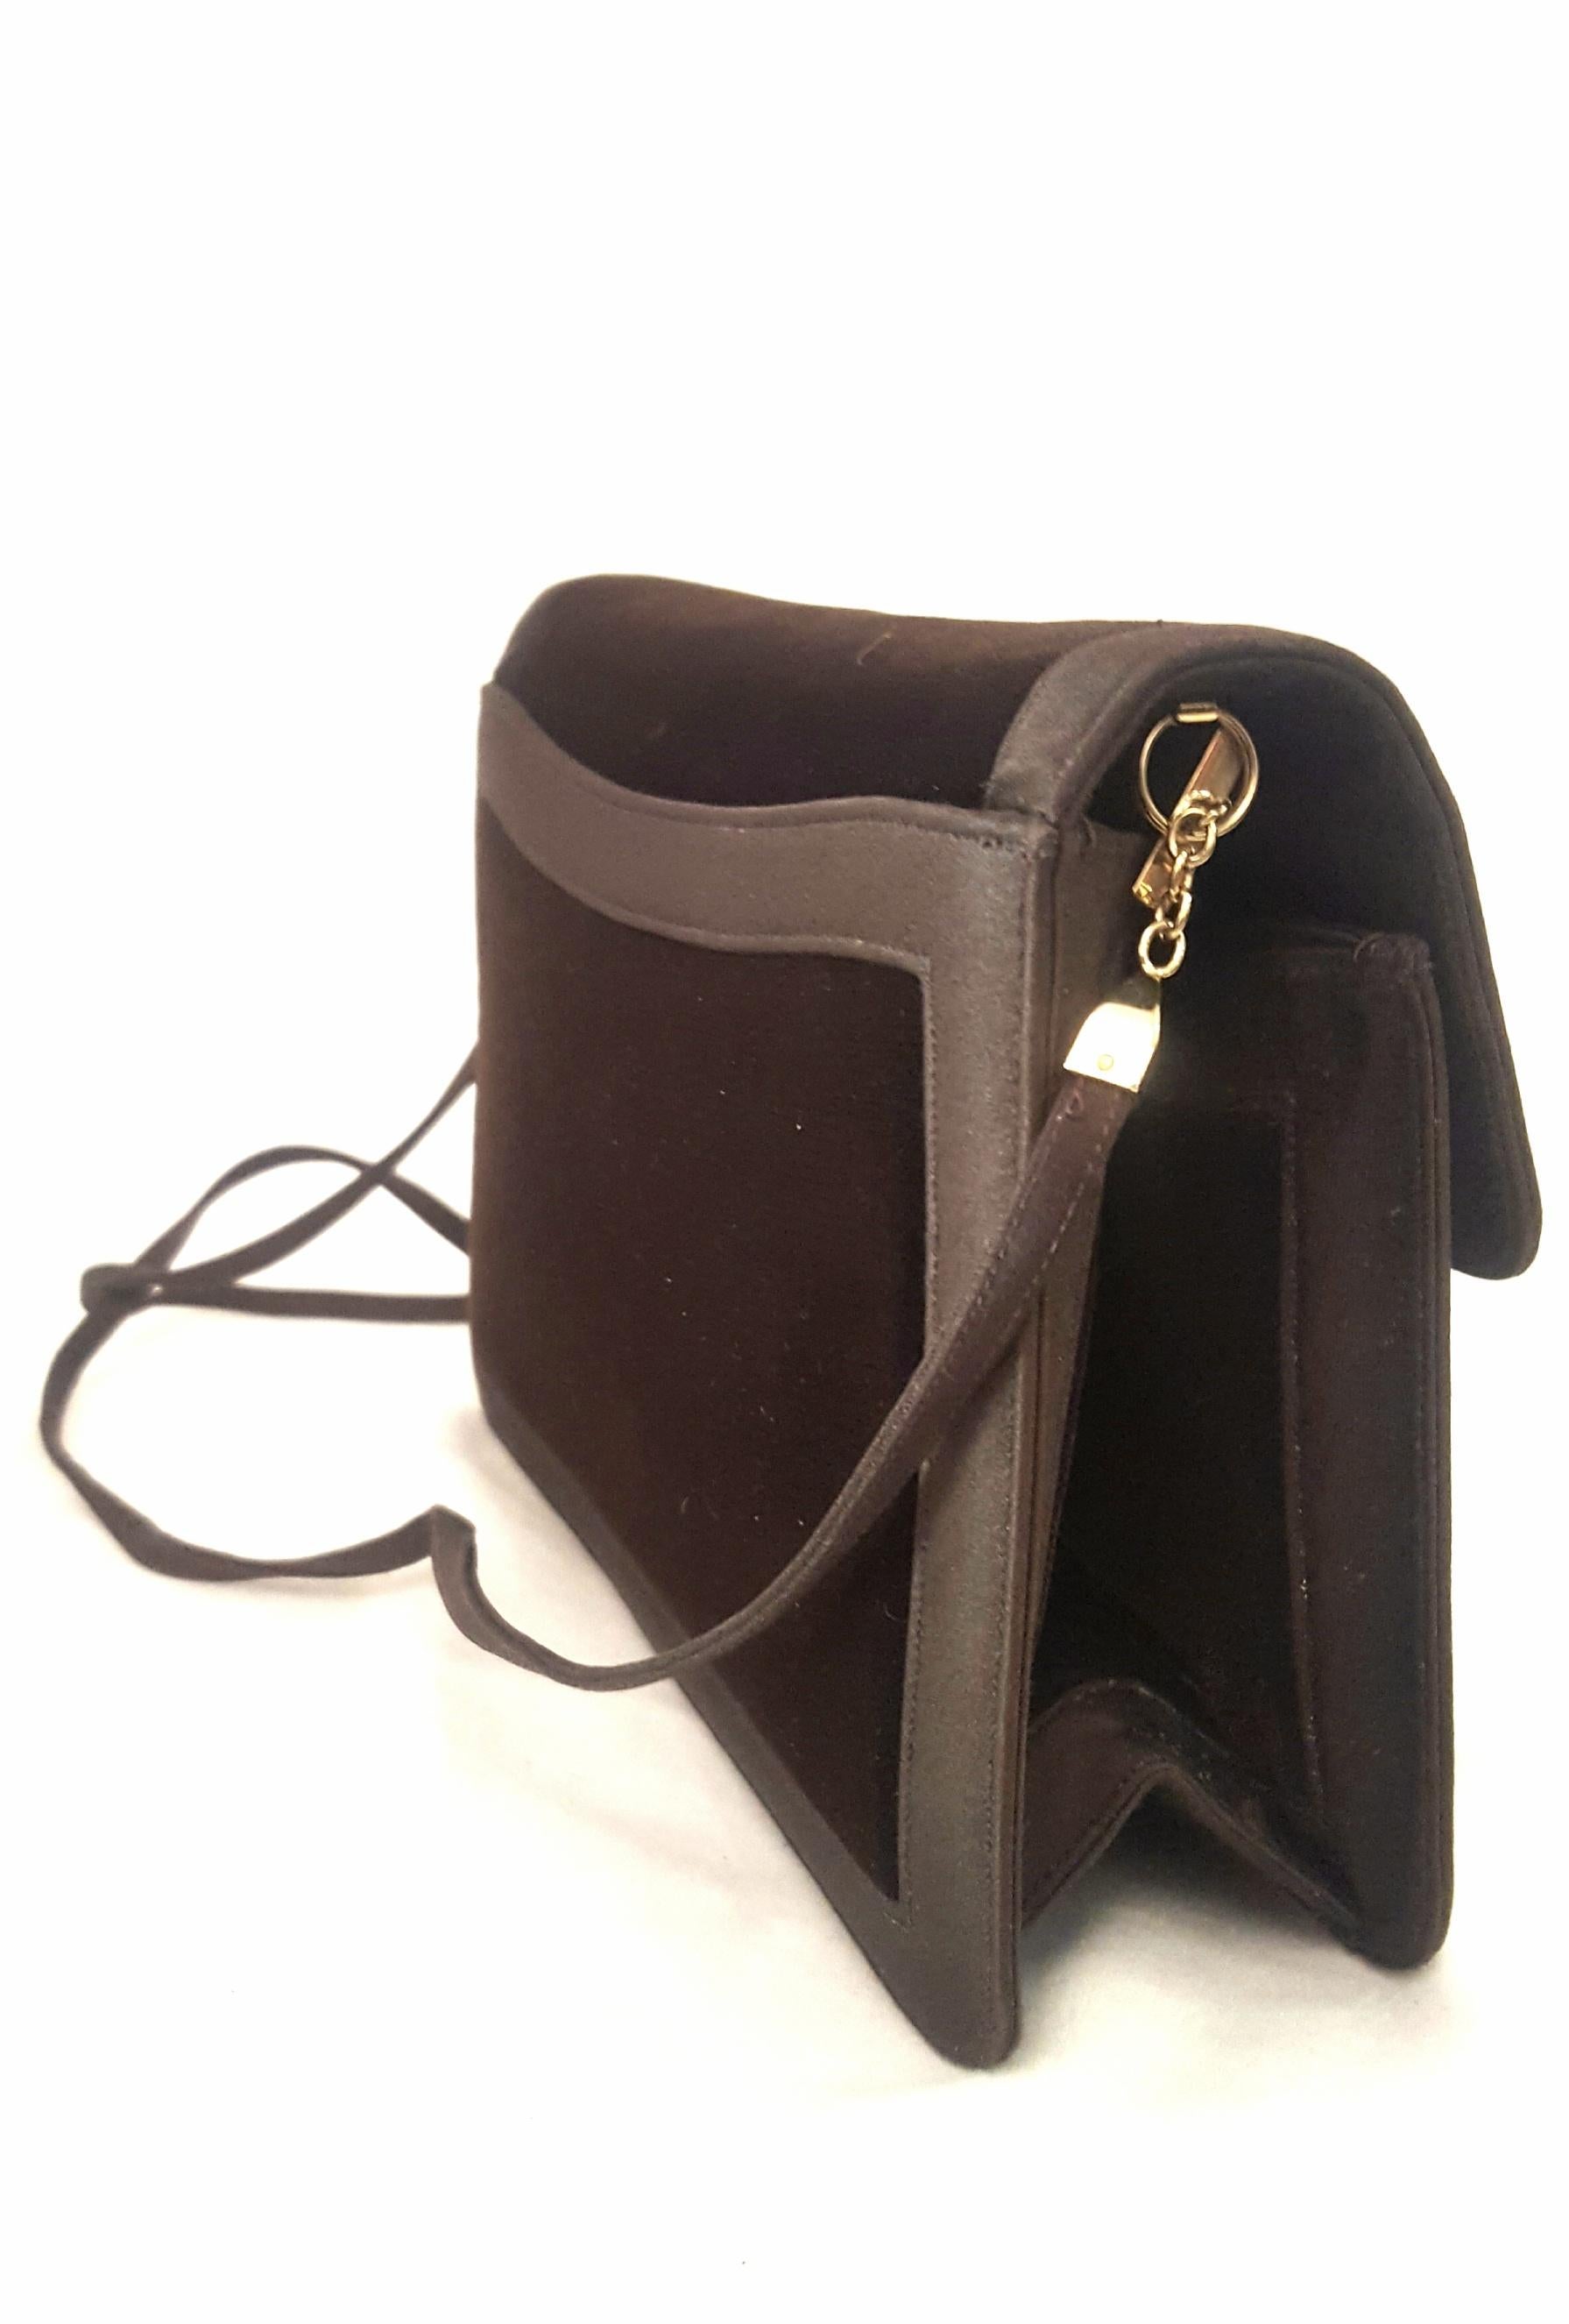 This Judith Leiber brown velvet and satin shoulder and clutch bag is lined in brown satin with one side slit pocket and one zippered pocket.  Single flap closure with magnetic snap is found at front.   This bag also contains one exterior slit pocket